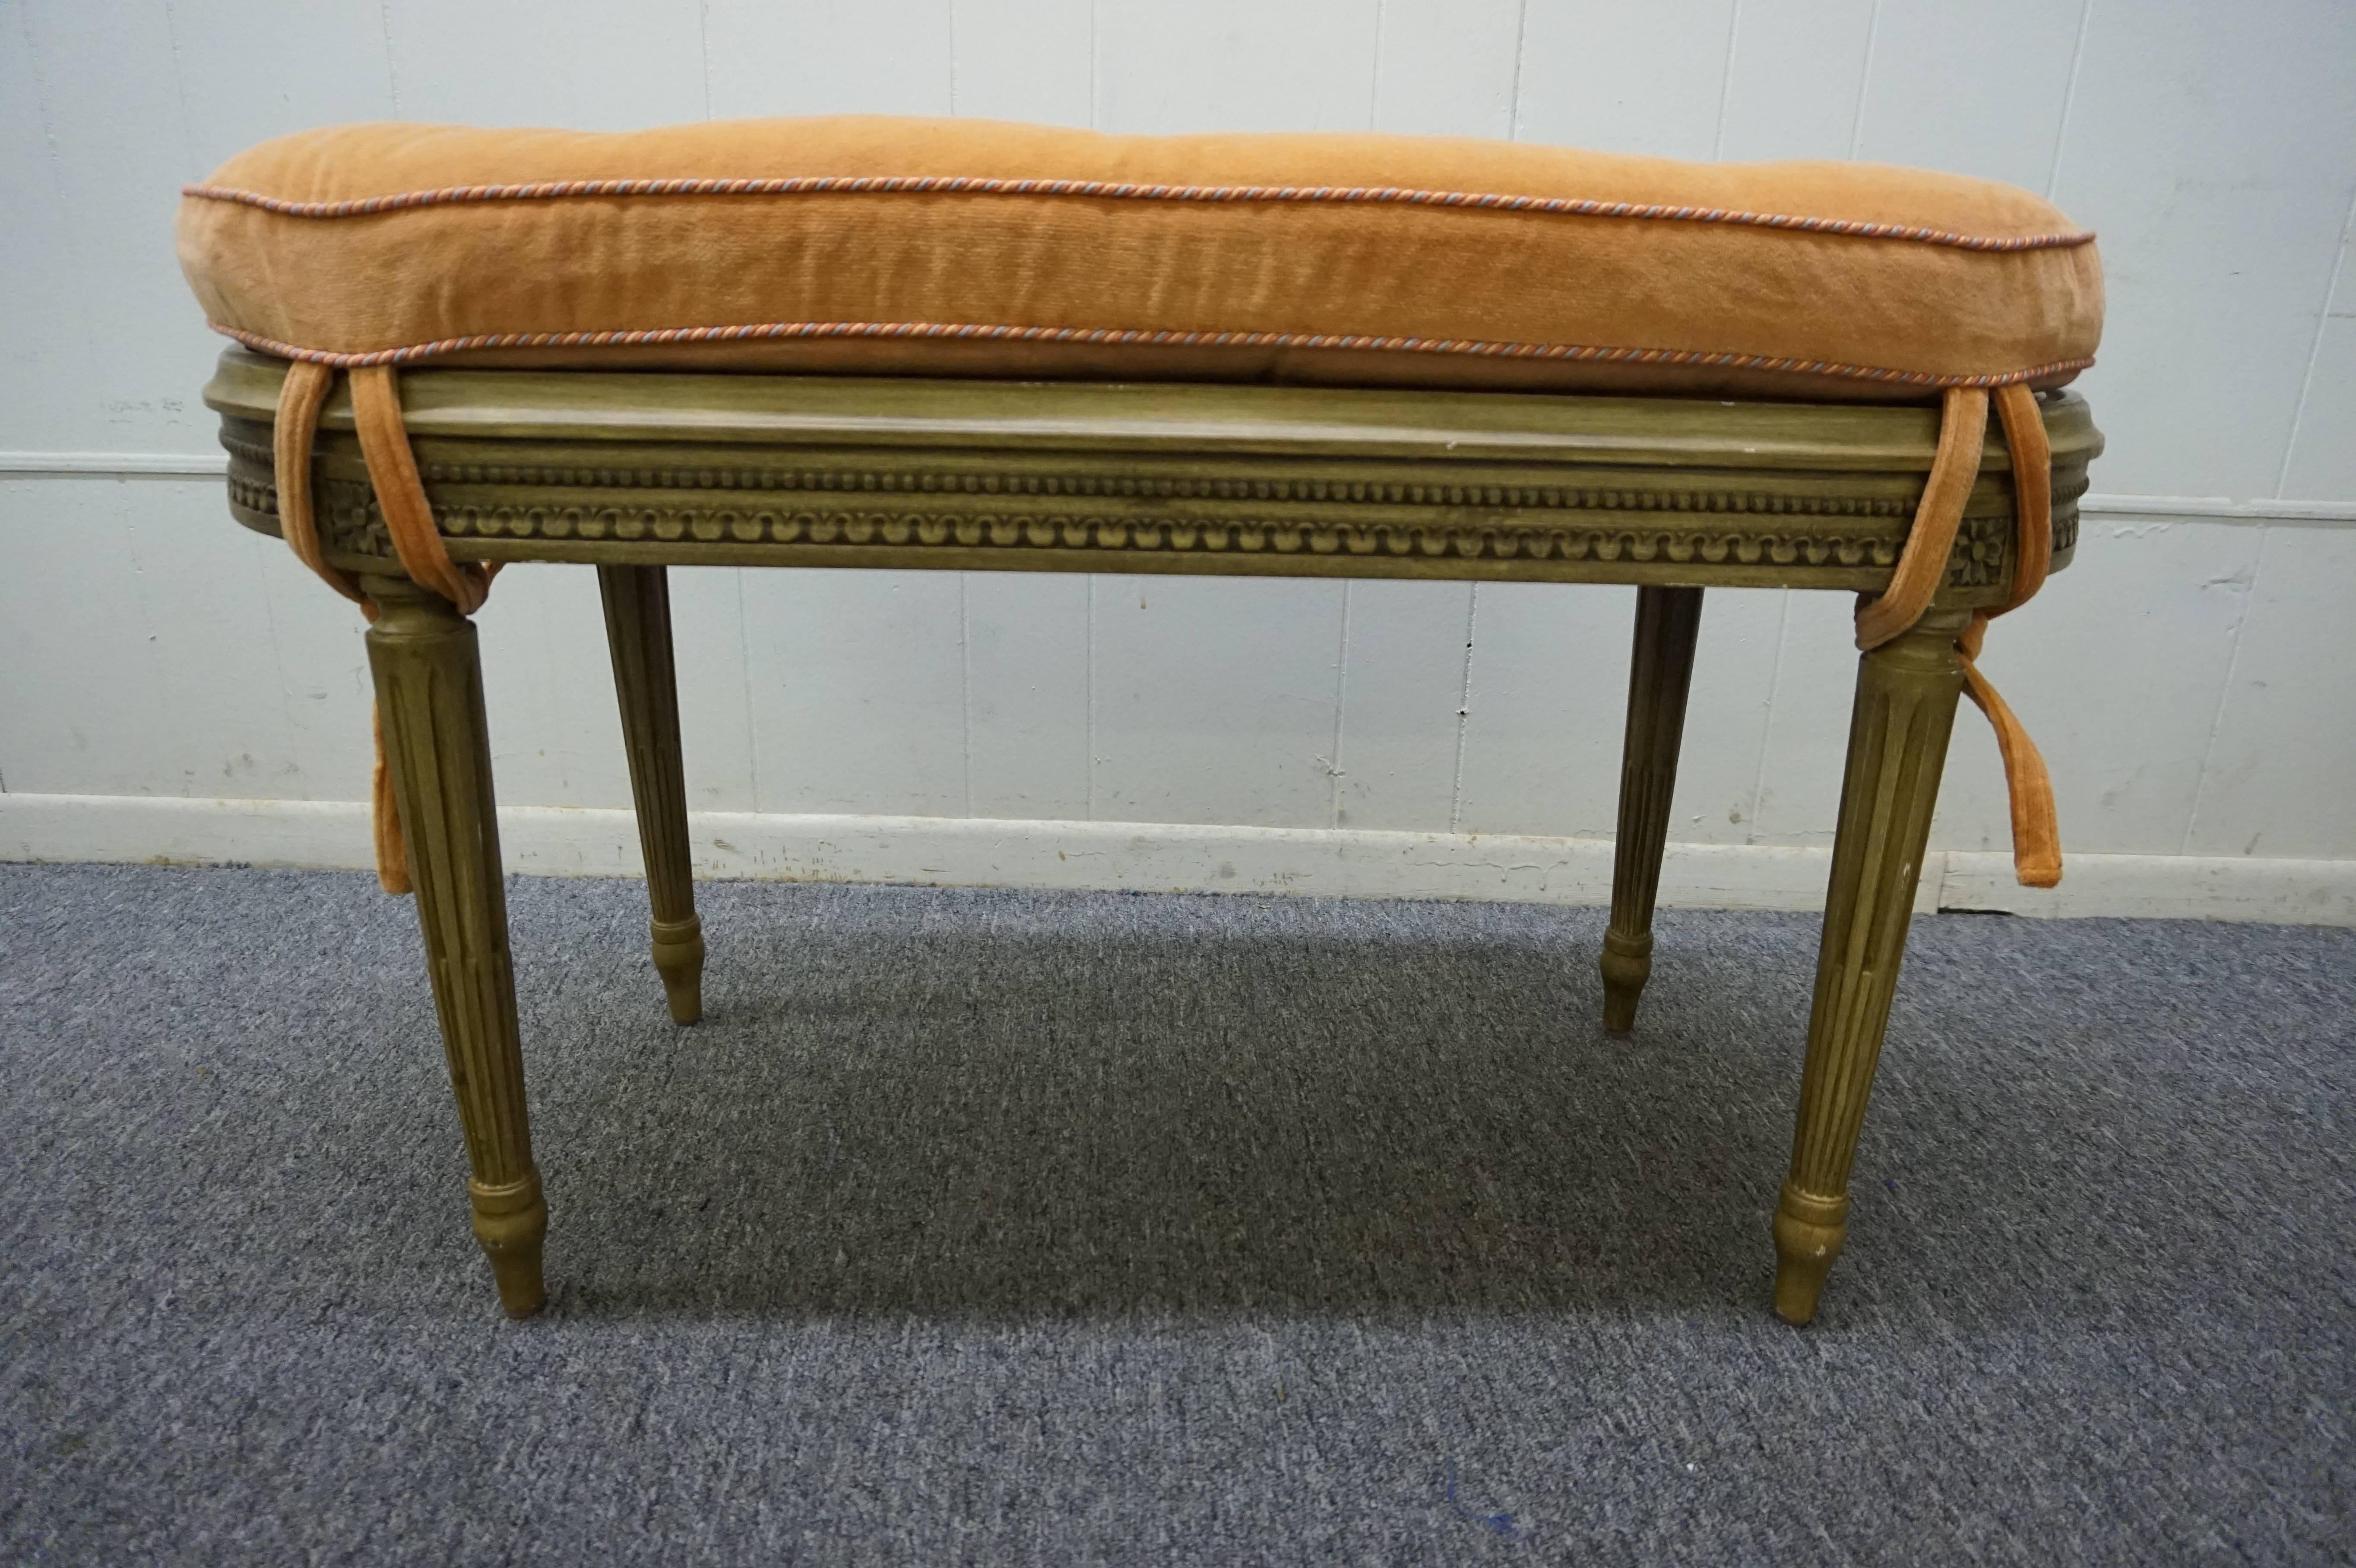 Lovely French Louis XVI style caned seat bench with nicely carved fluted legs.